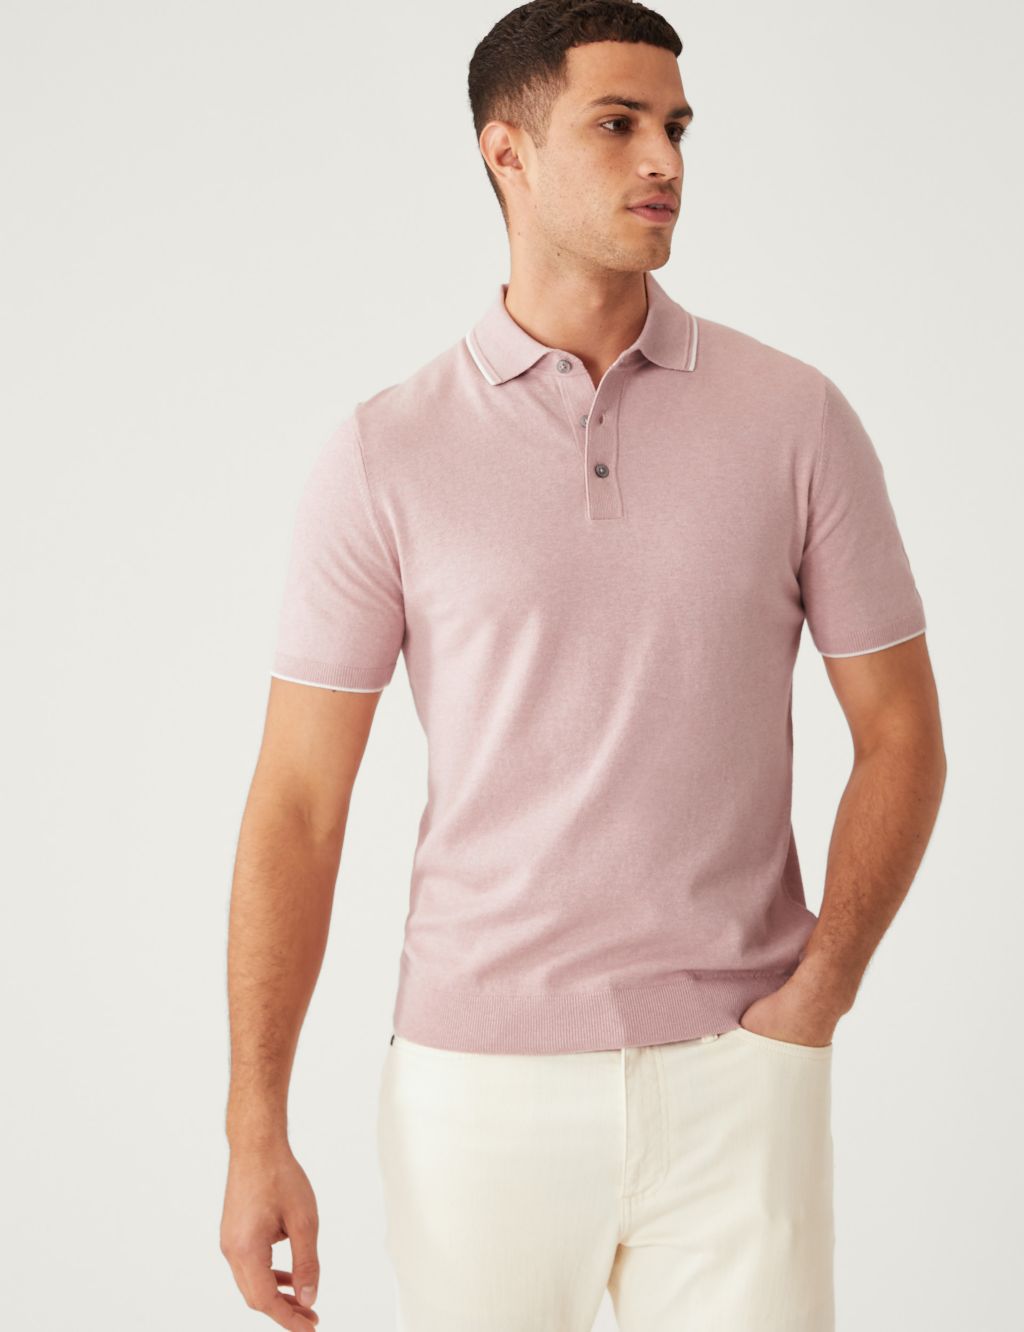 Cotton Rich Short Sleeve Knitted Polo Shirt image 4